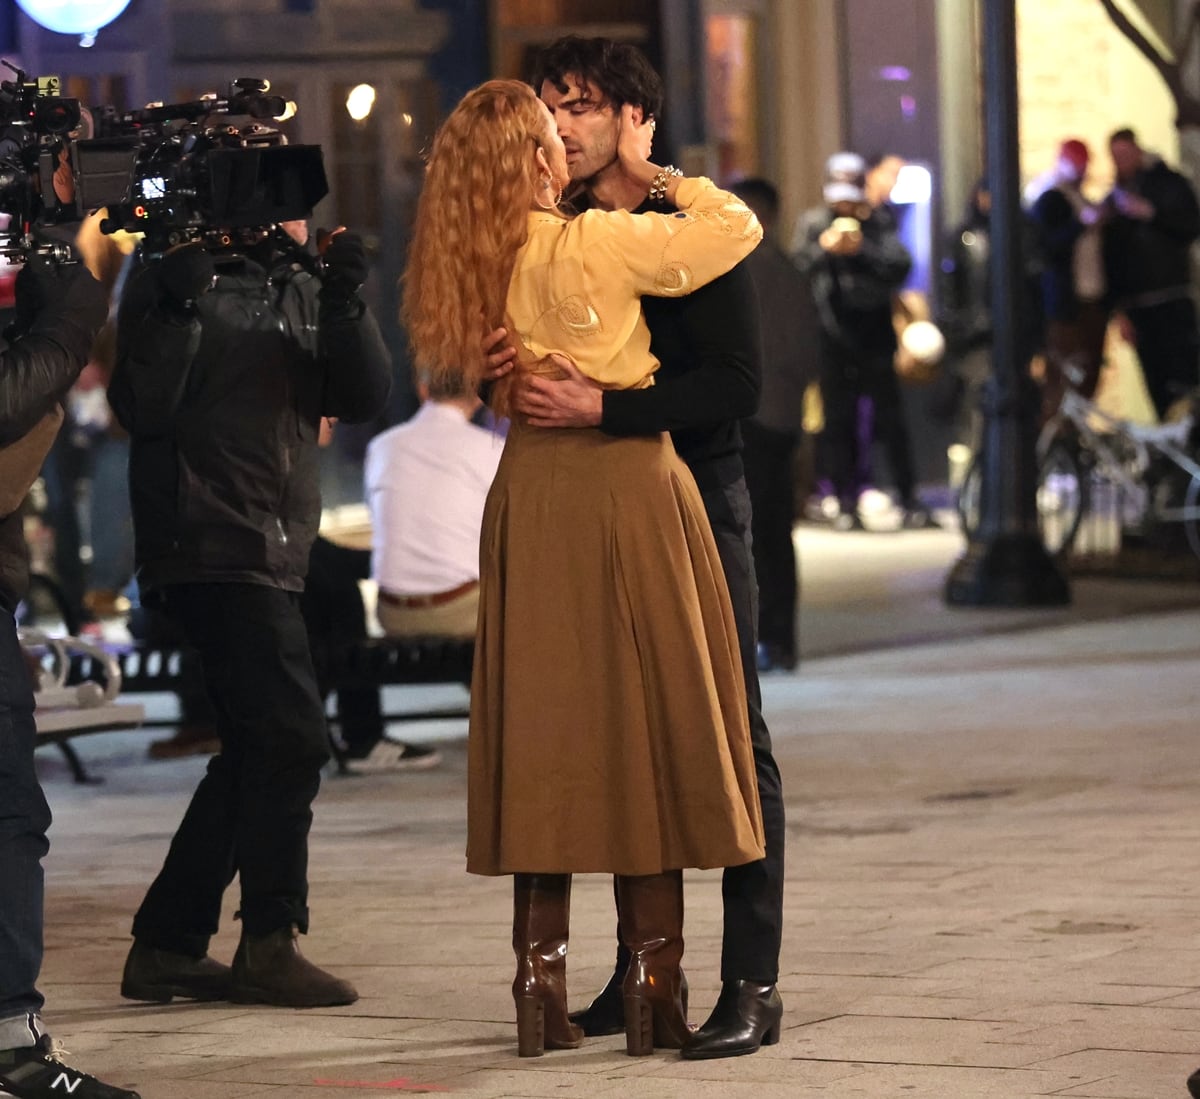 Sparks fly as Blake Lively and Justin Baldoni share sizzling kisses on the set of "It Ends With Us"!